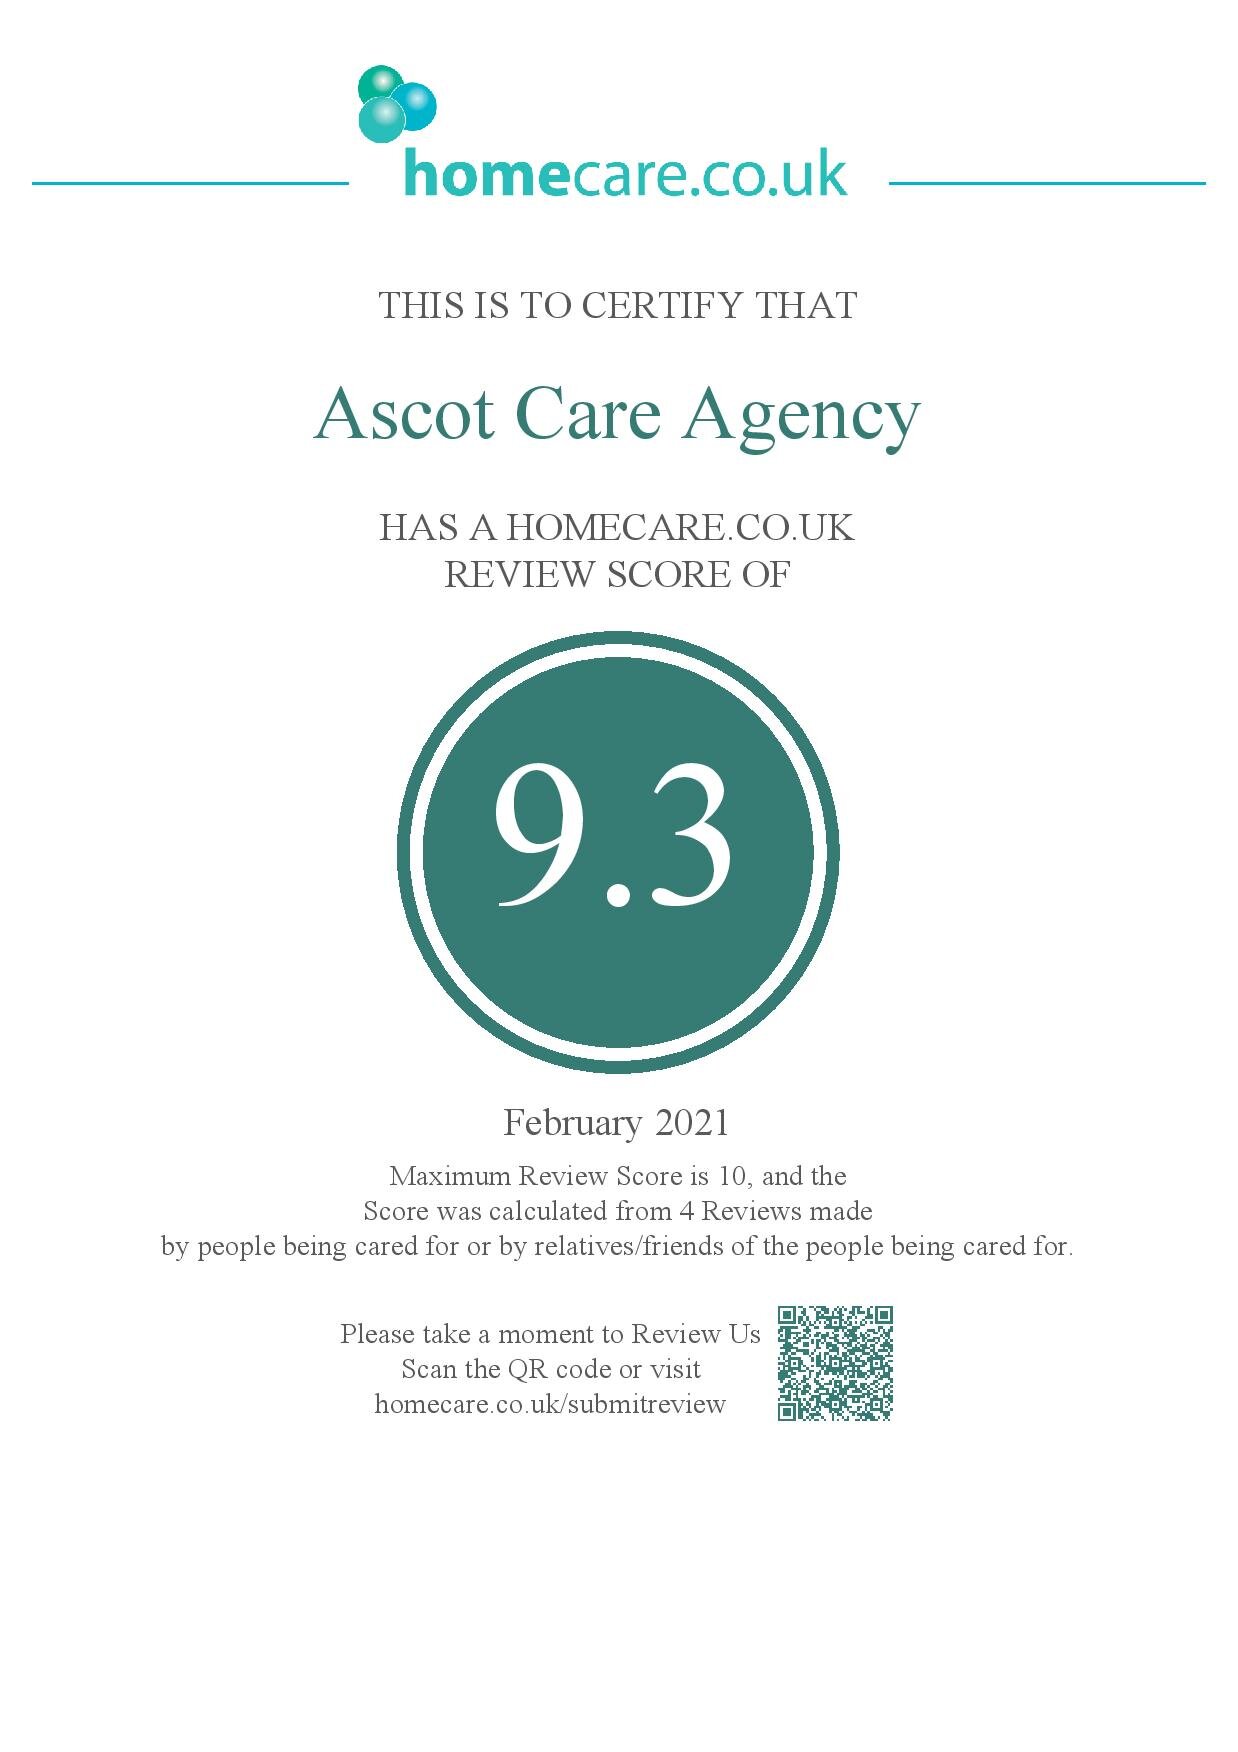 2021-02-15-cert-Ascot-Care-Agency-page-001.jpg